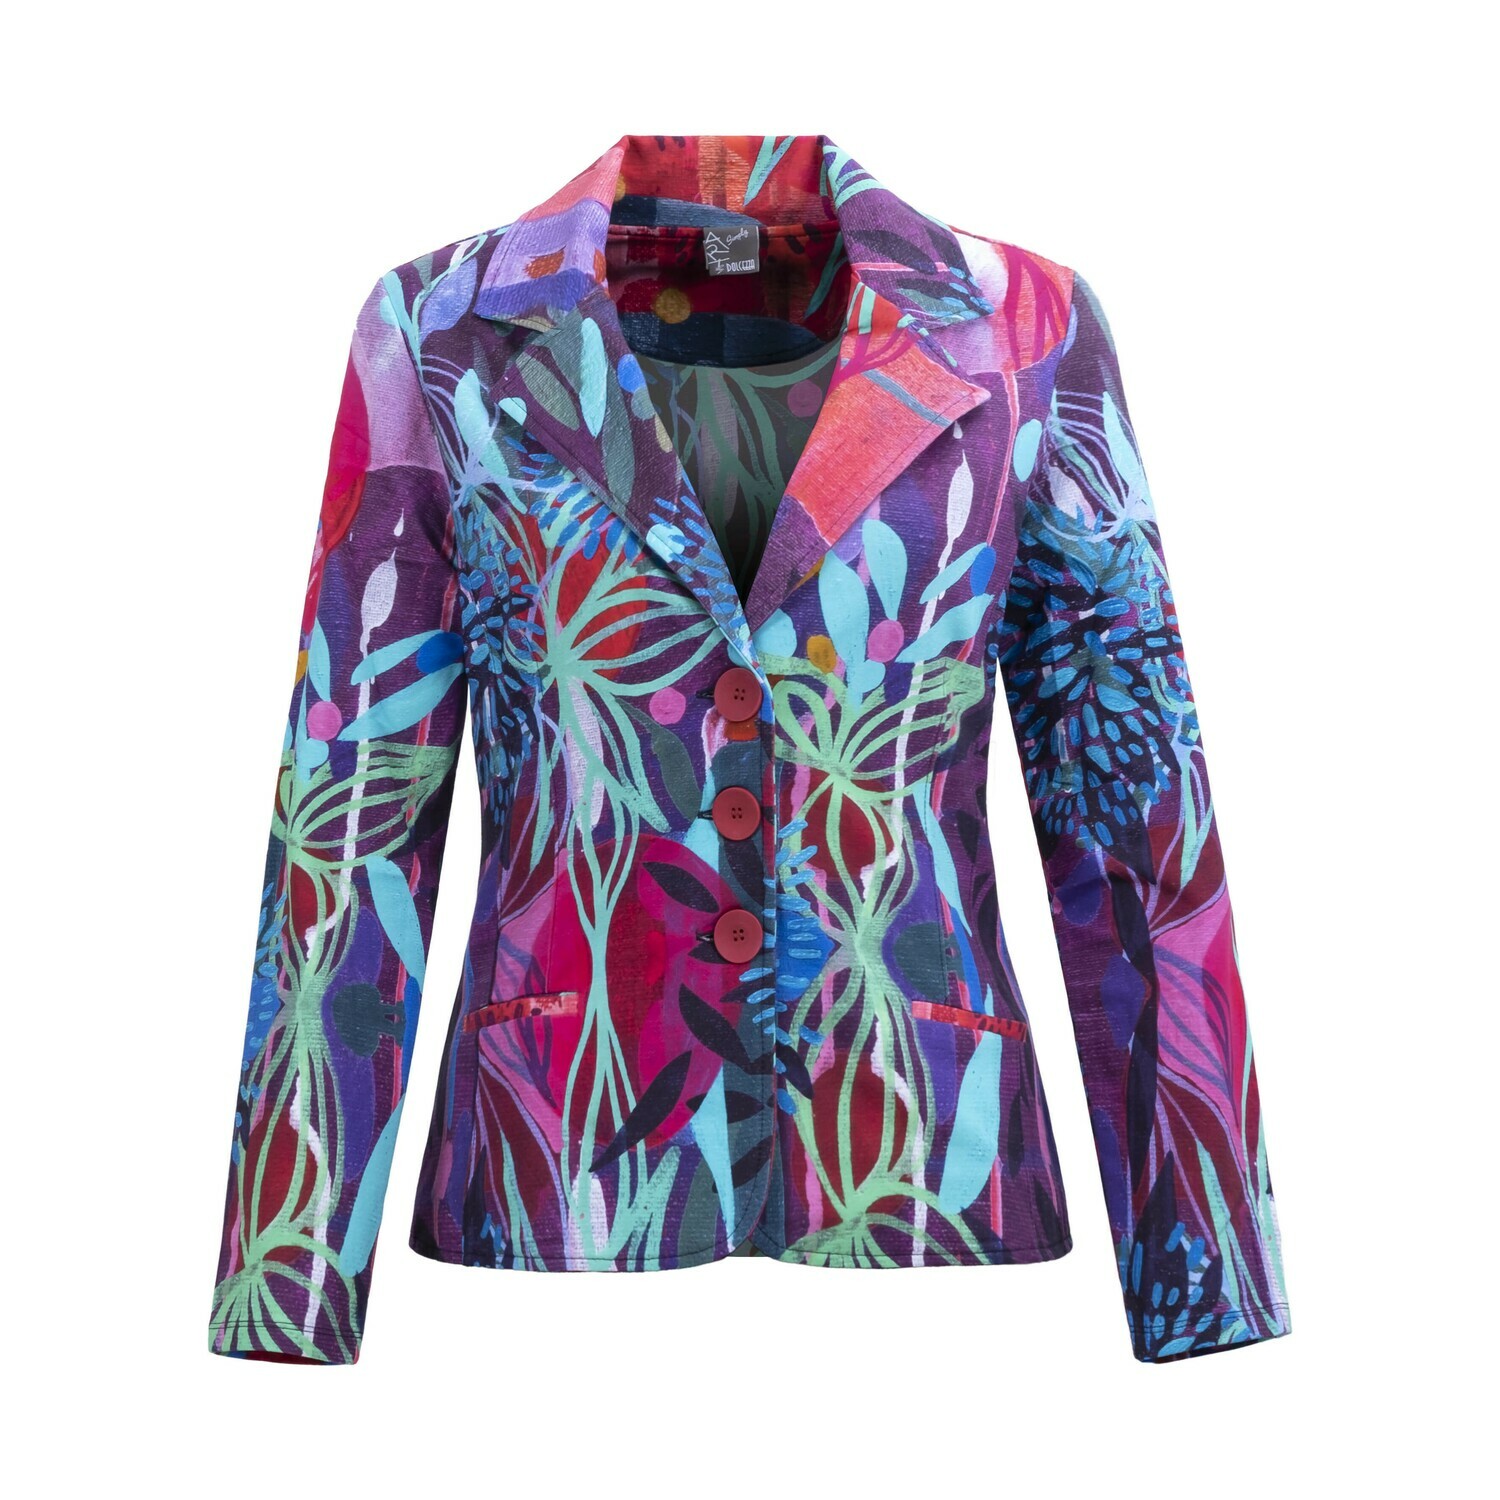 Simply Art Dolcezza: Color & Joy Tangle Of Leaves Abstract Art Blazer